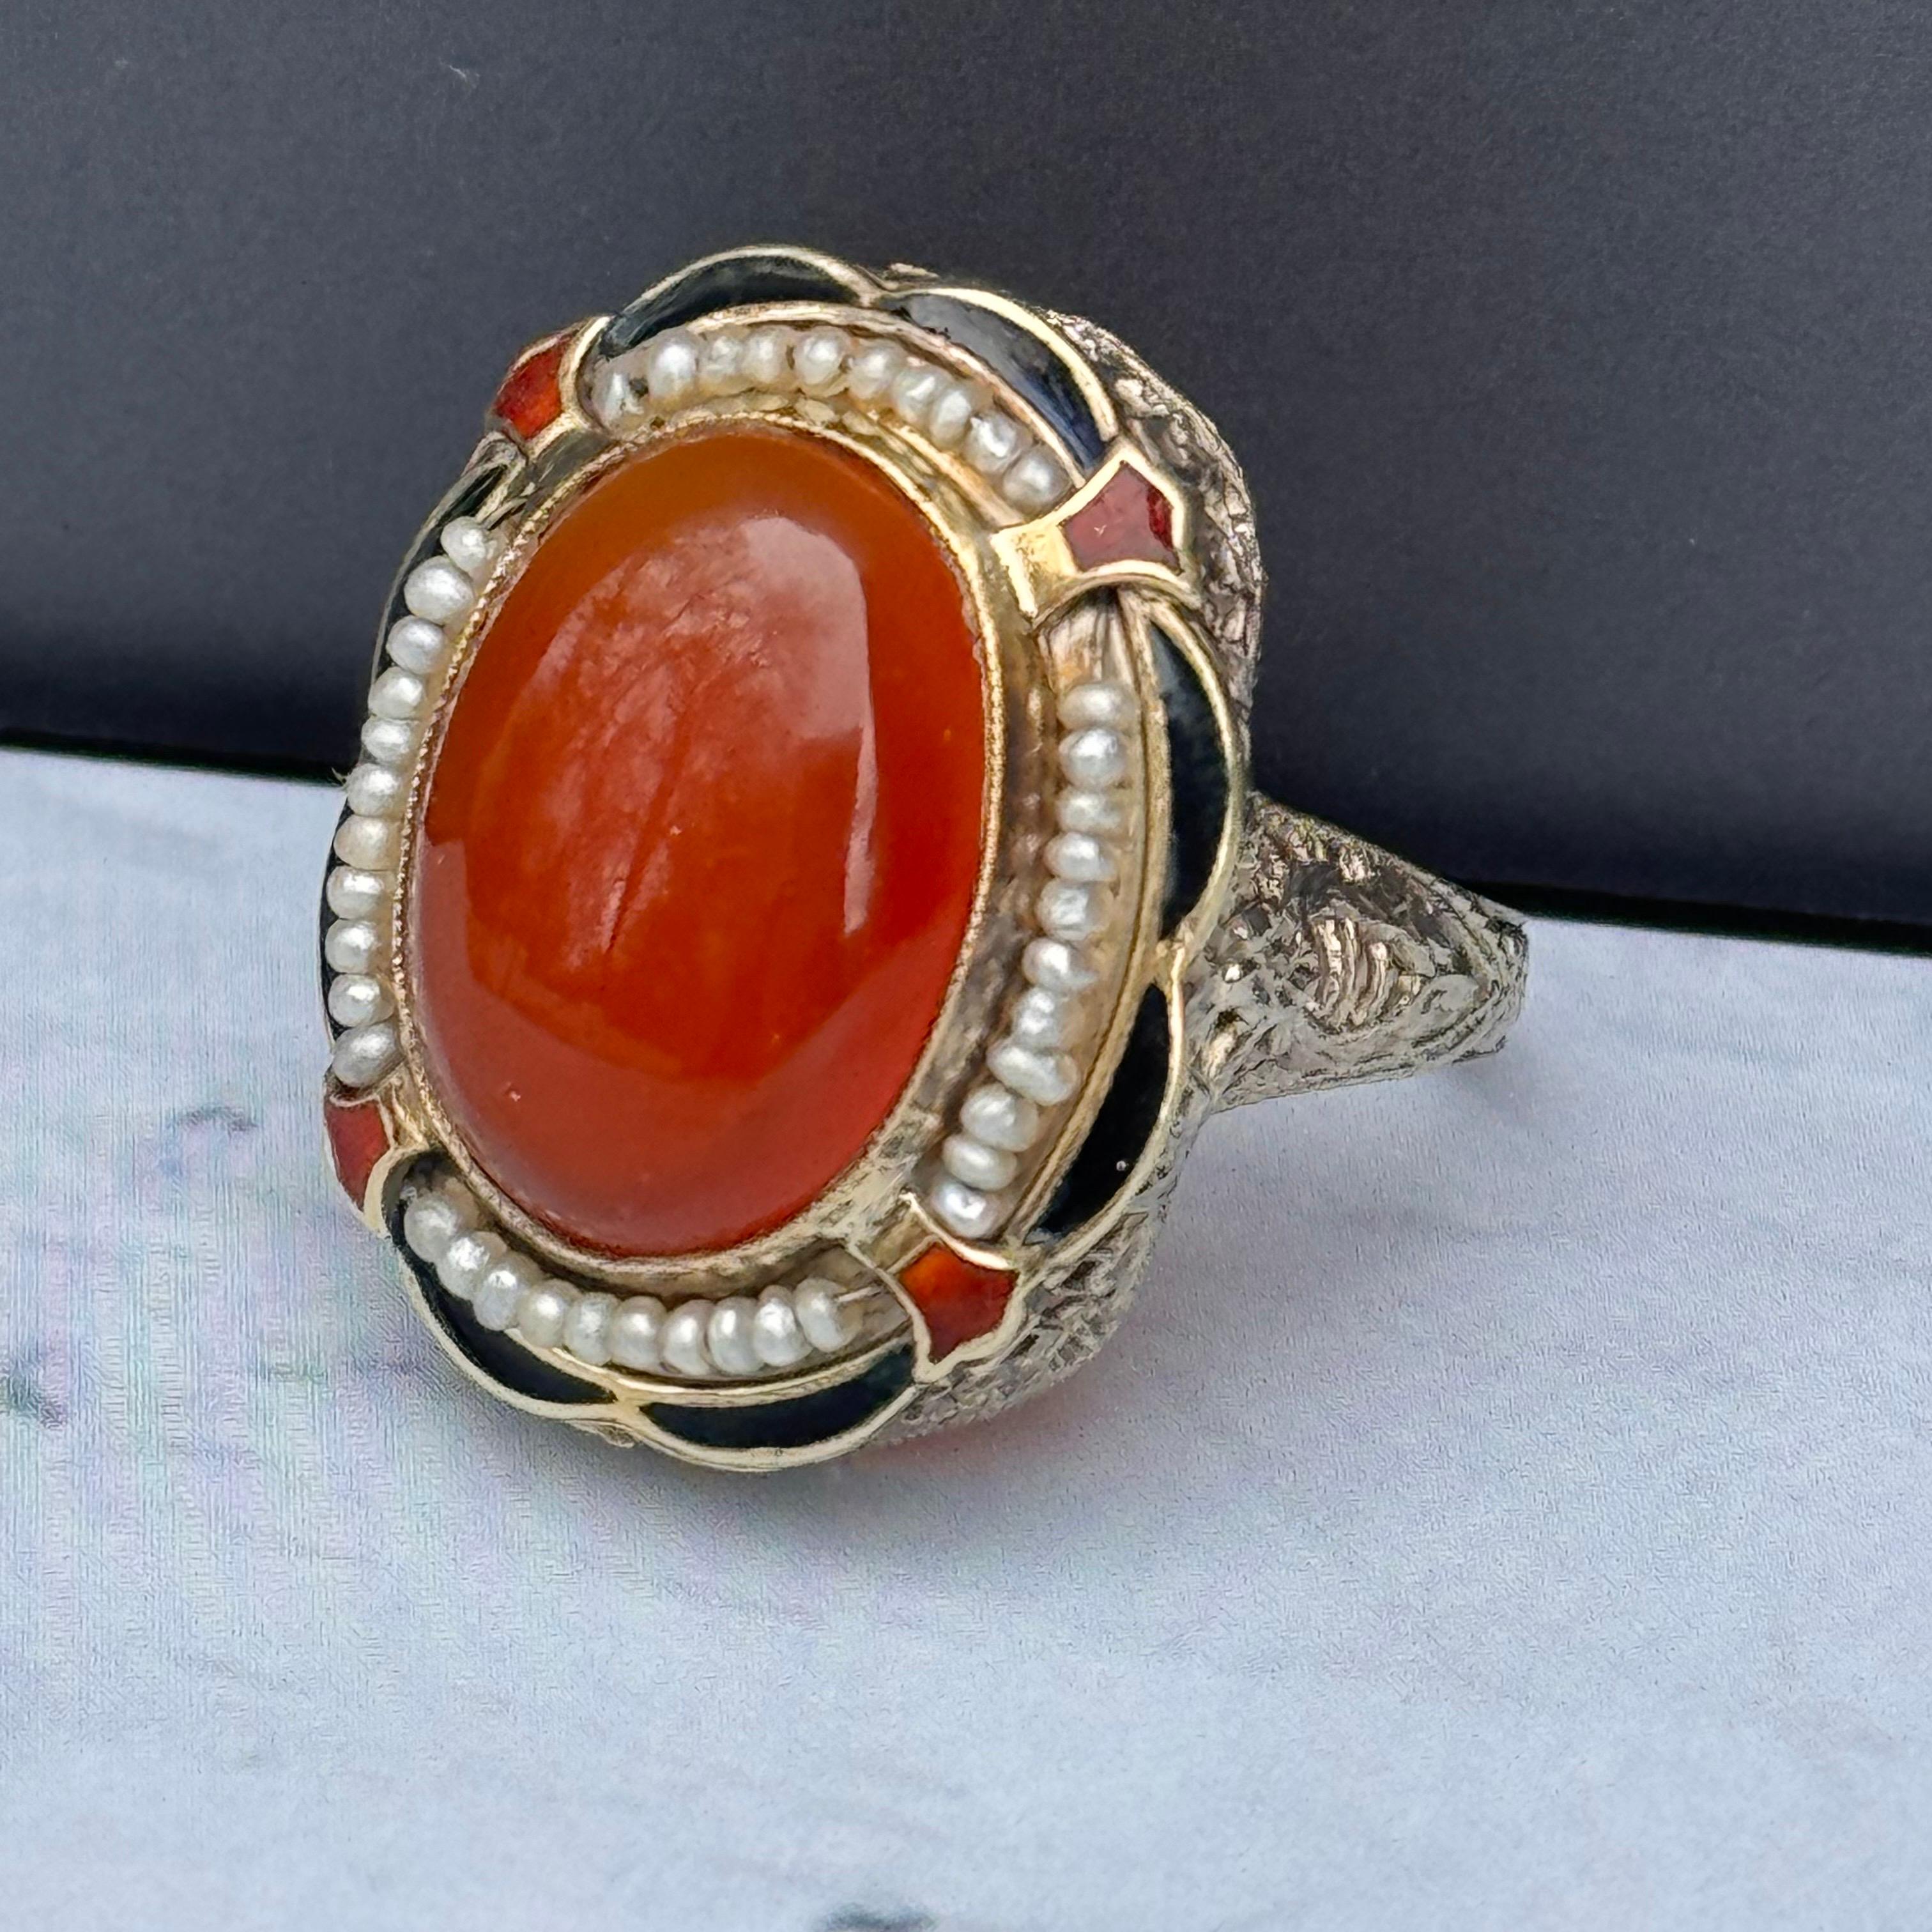 Vintage Art Deco Ring Carnelian Seed pearls Enamel 14k White Gold Filigree In Good Condition For Sale In Plainsboro, NJ